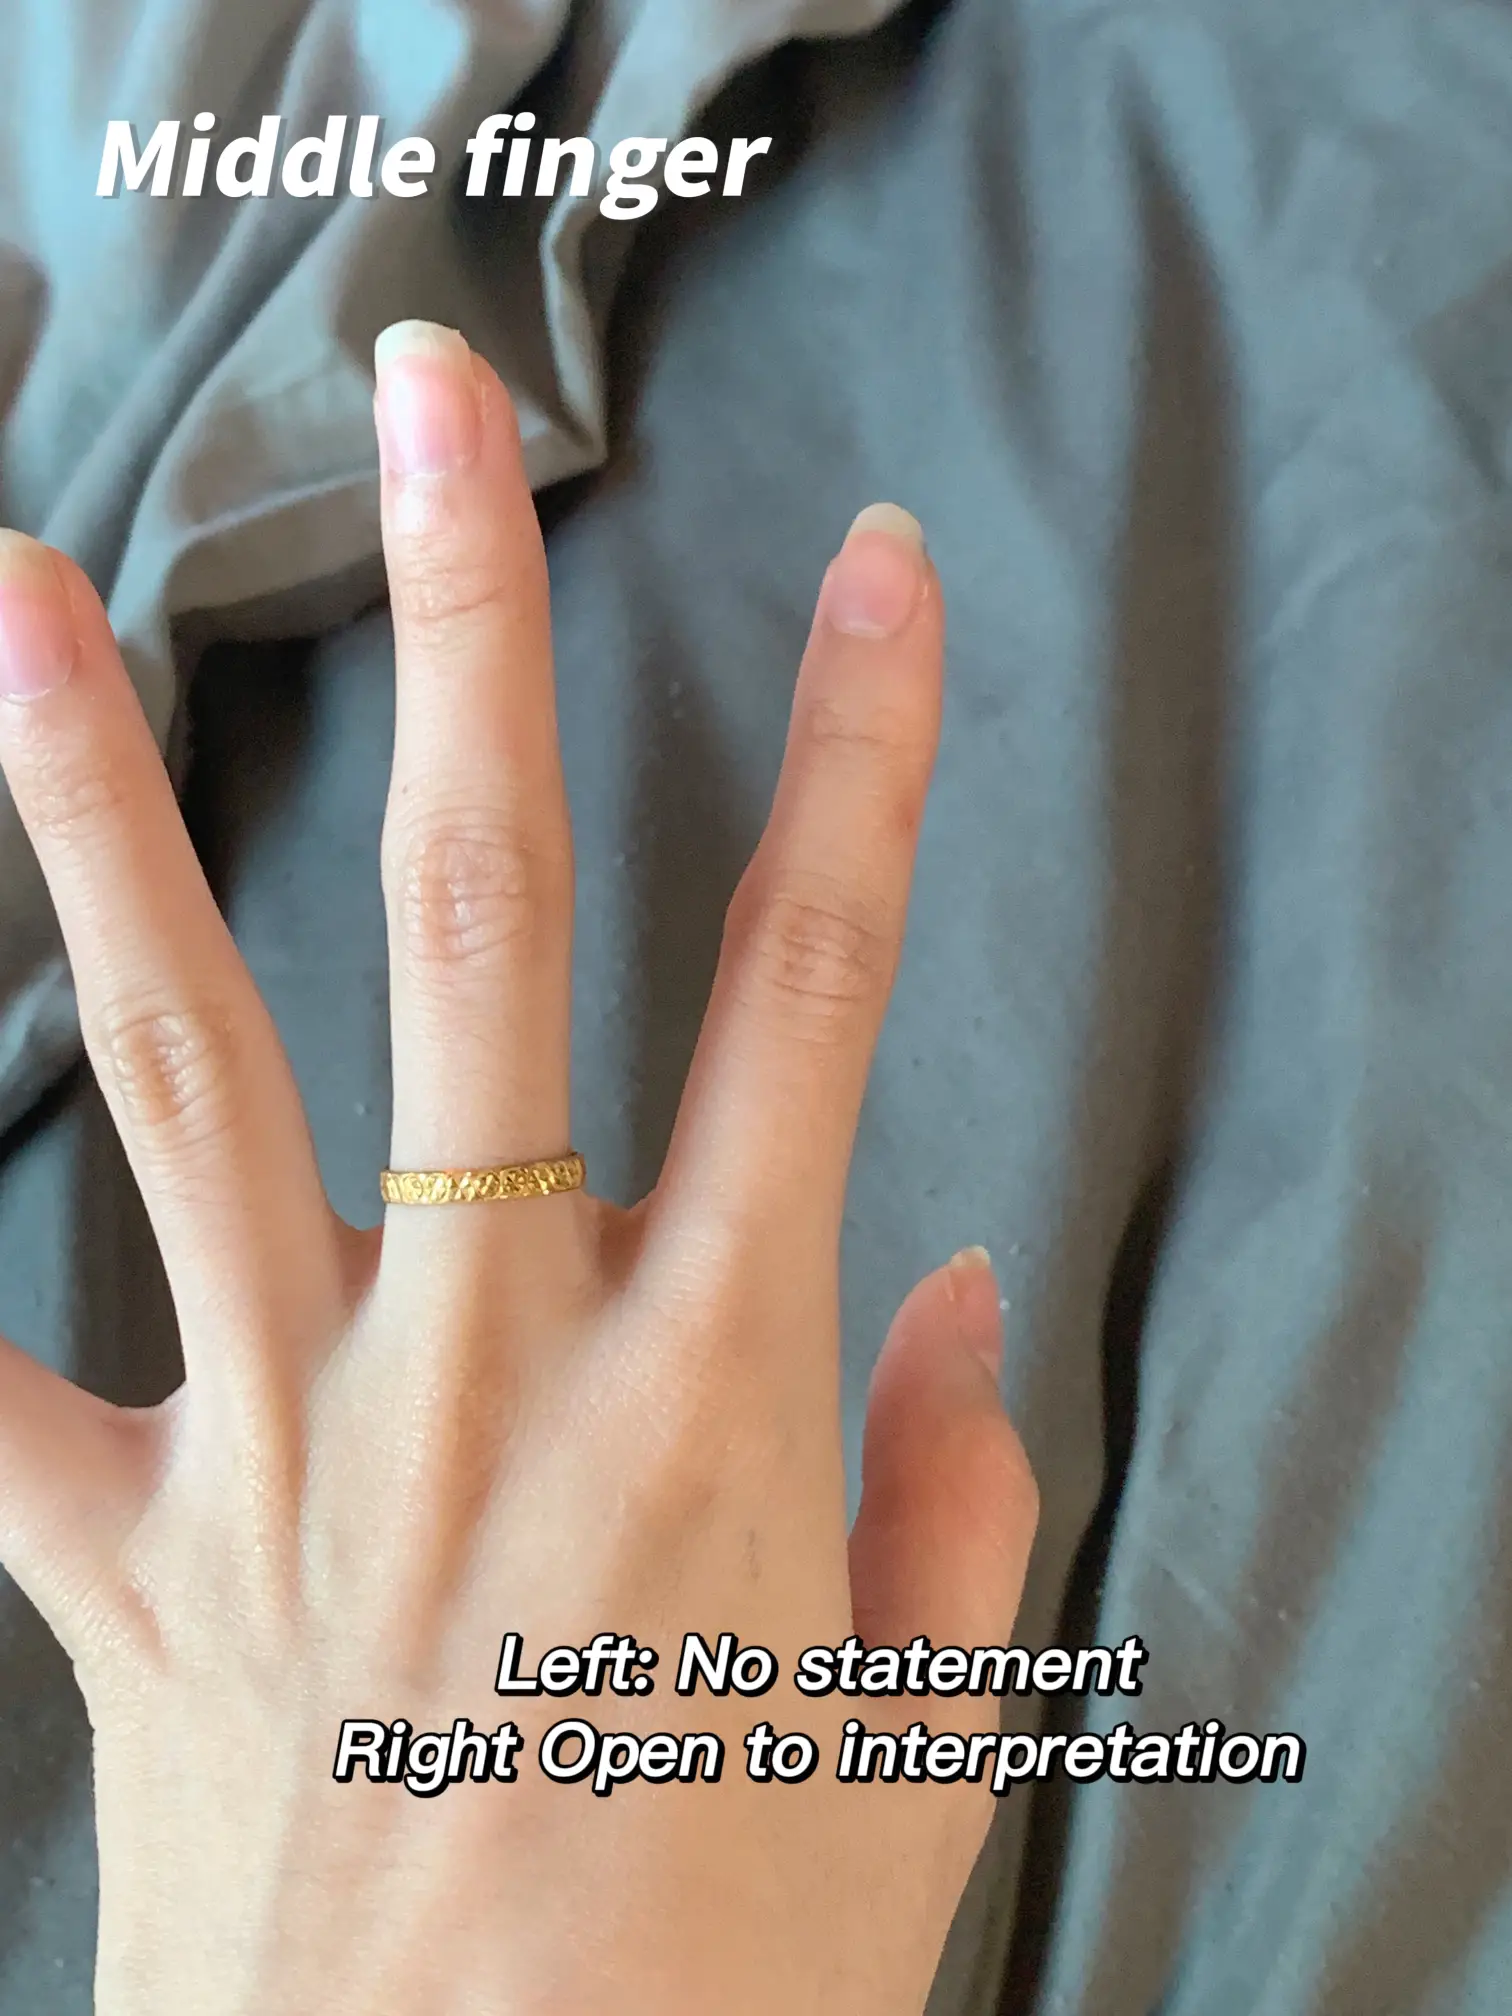 What Is the Meaning of Each Finger for Rings?